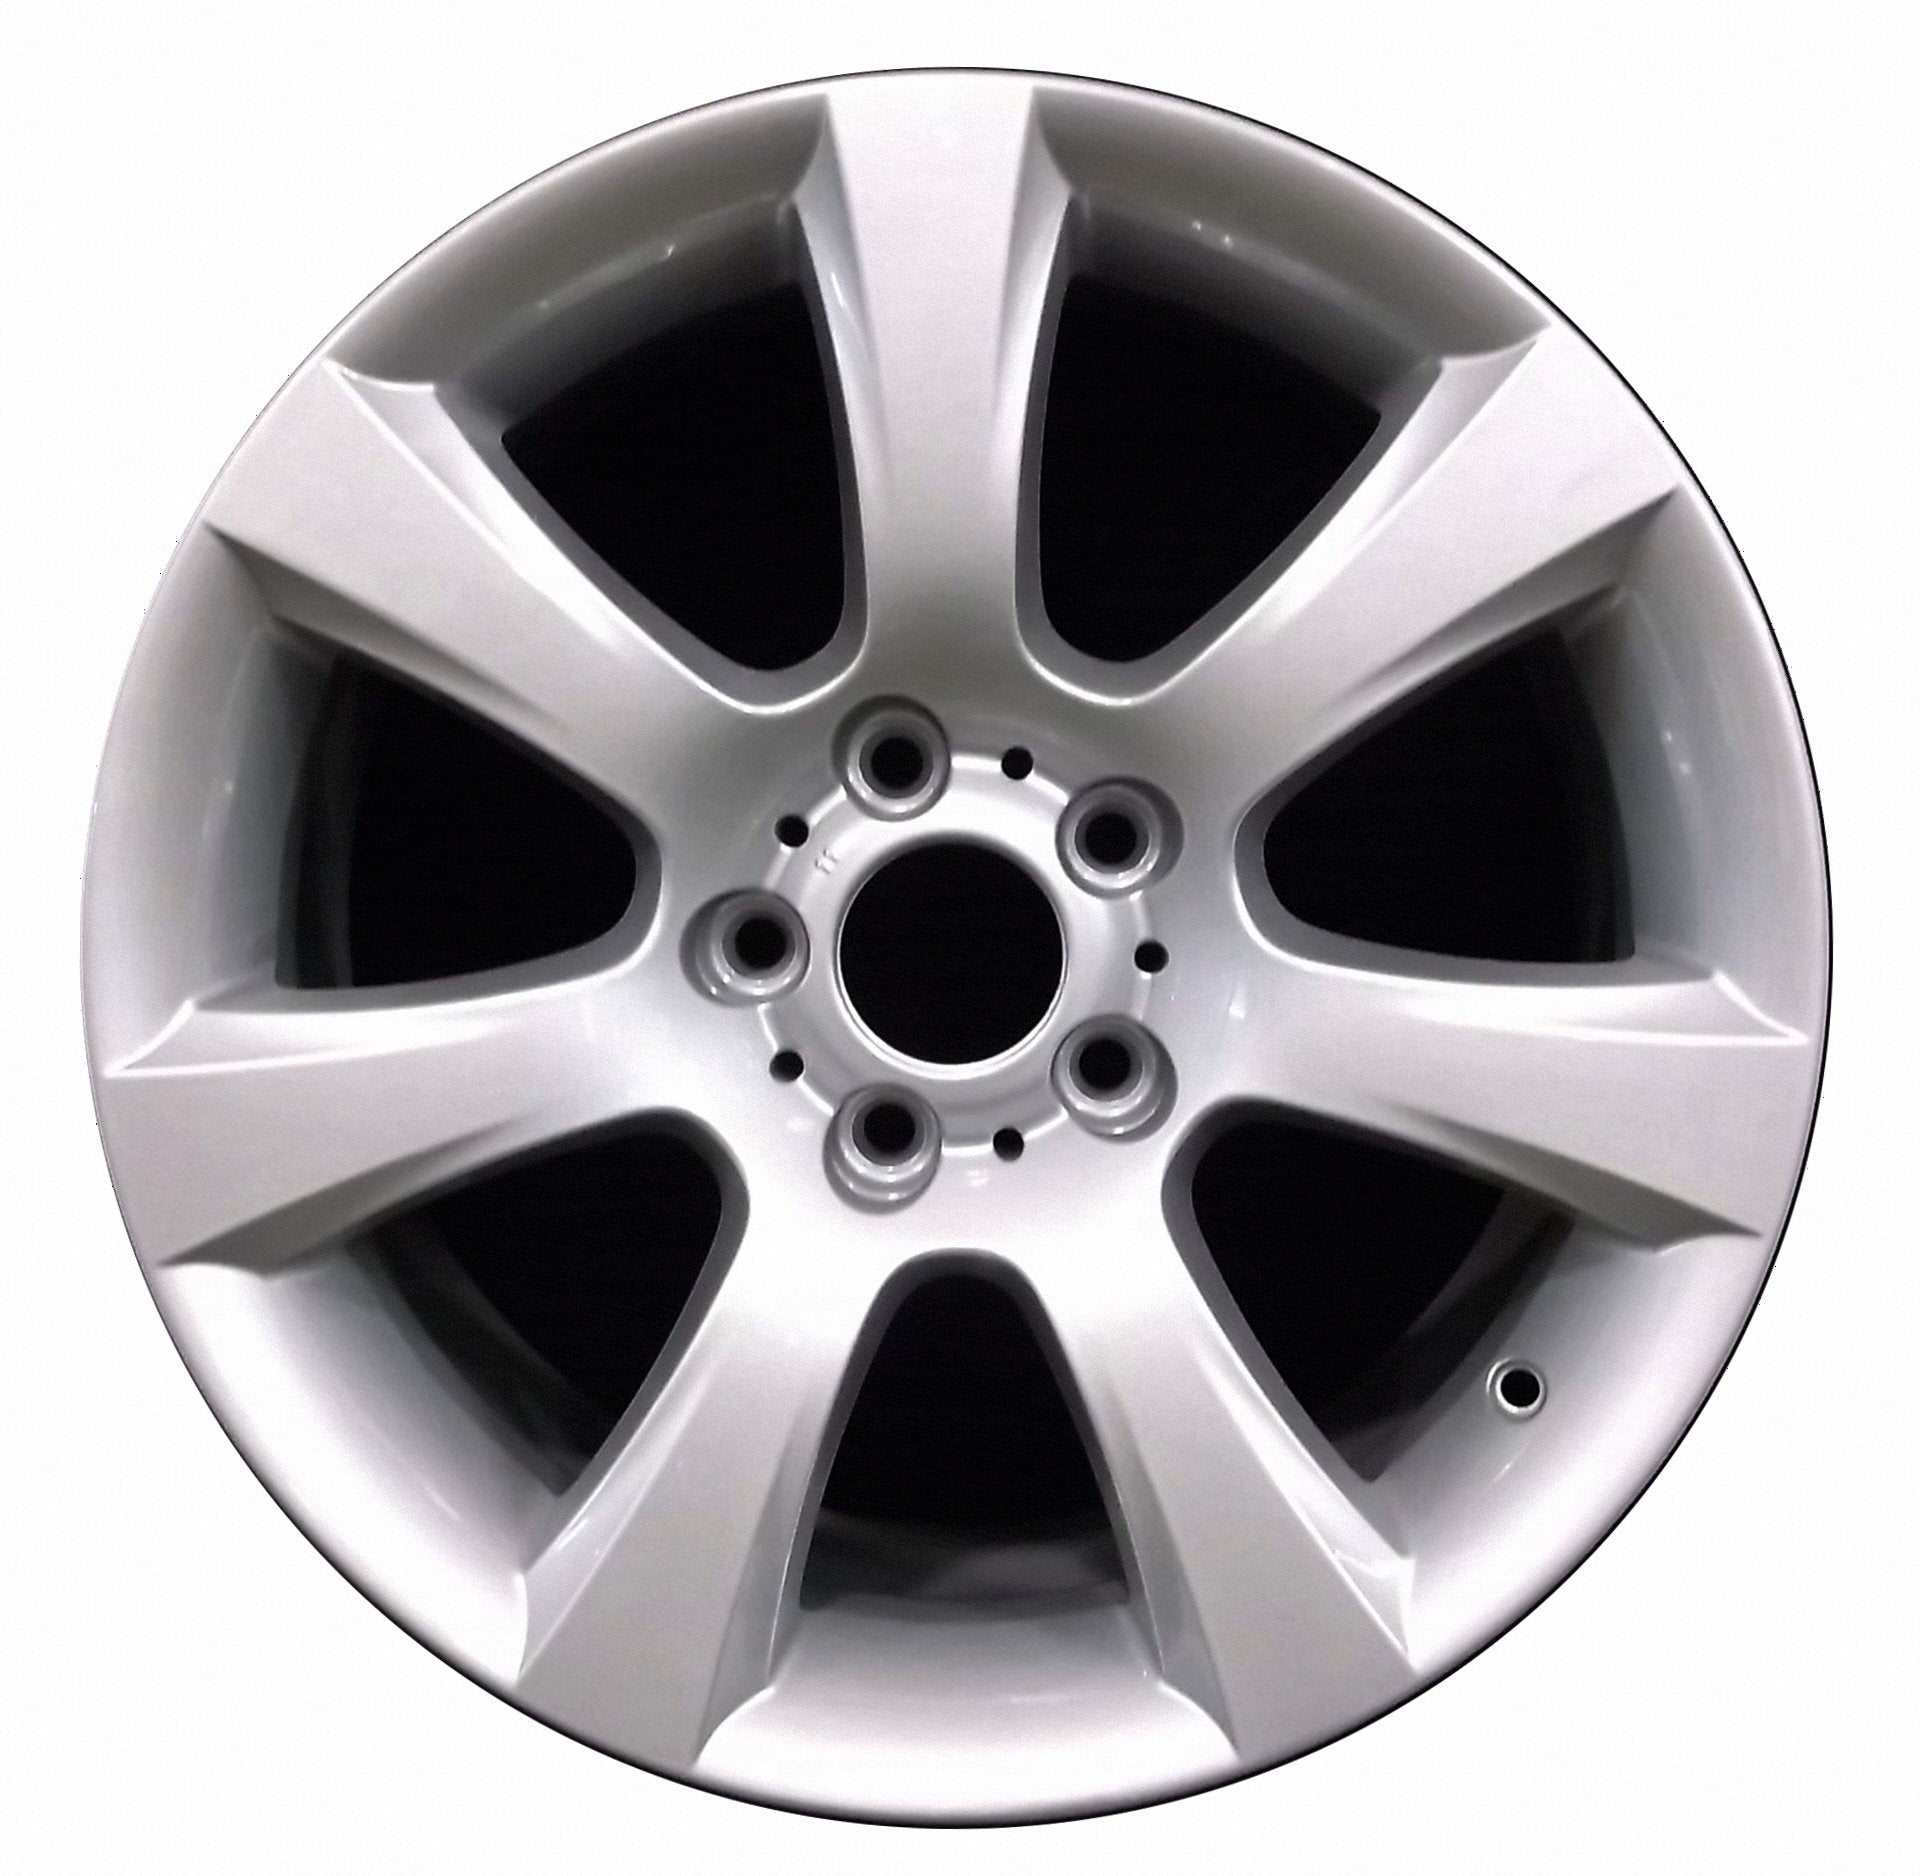 BMW 528i  2011, 2012, 2013, 2014, 2015, 2016 Factory OEM Car Wheel Size 18x9 Alloy WAO.71411RE.PS10.FF